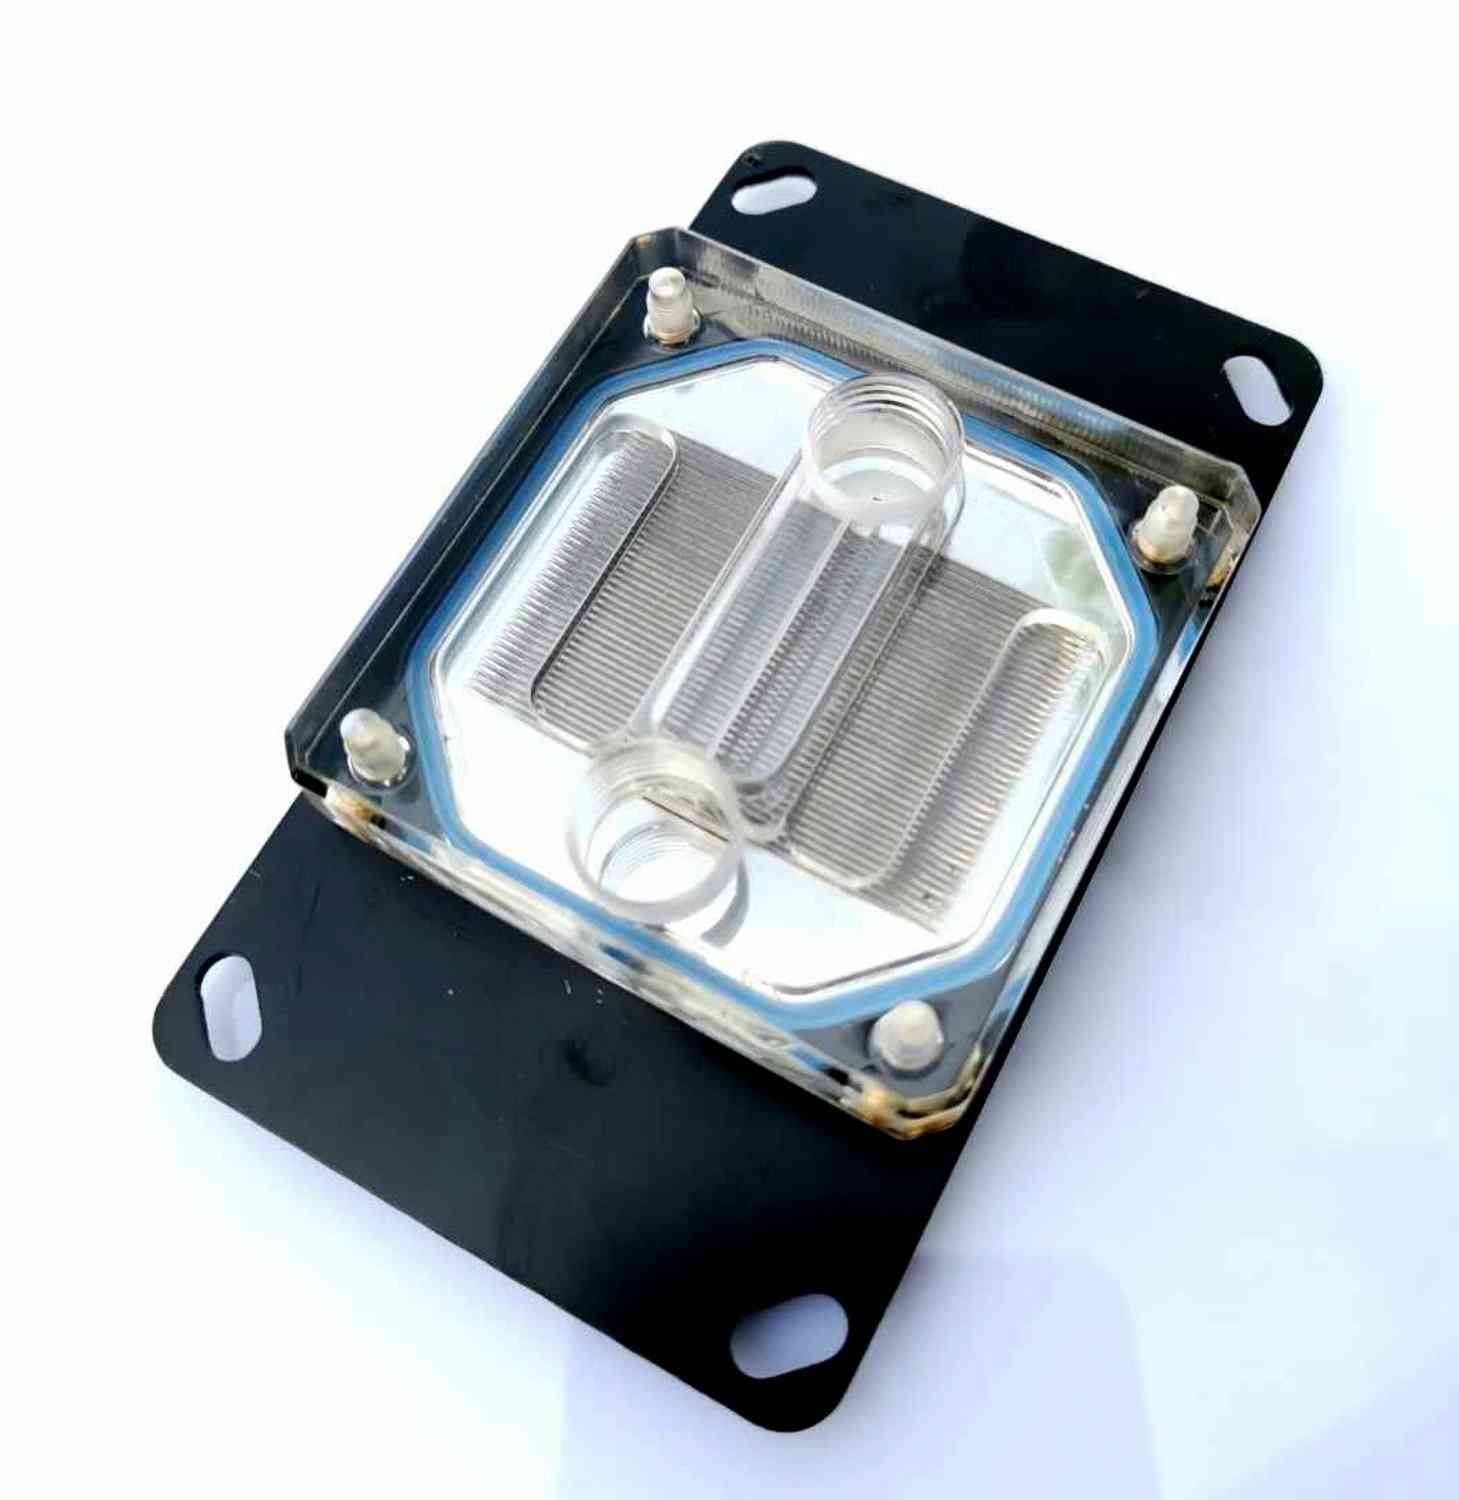 Acrylic Top With Light Cpu Water Cooling Block Microcutting Copper Nickeled